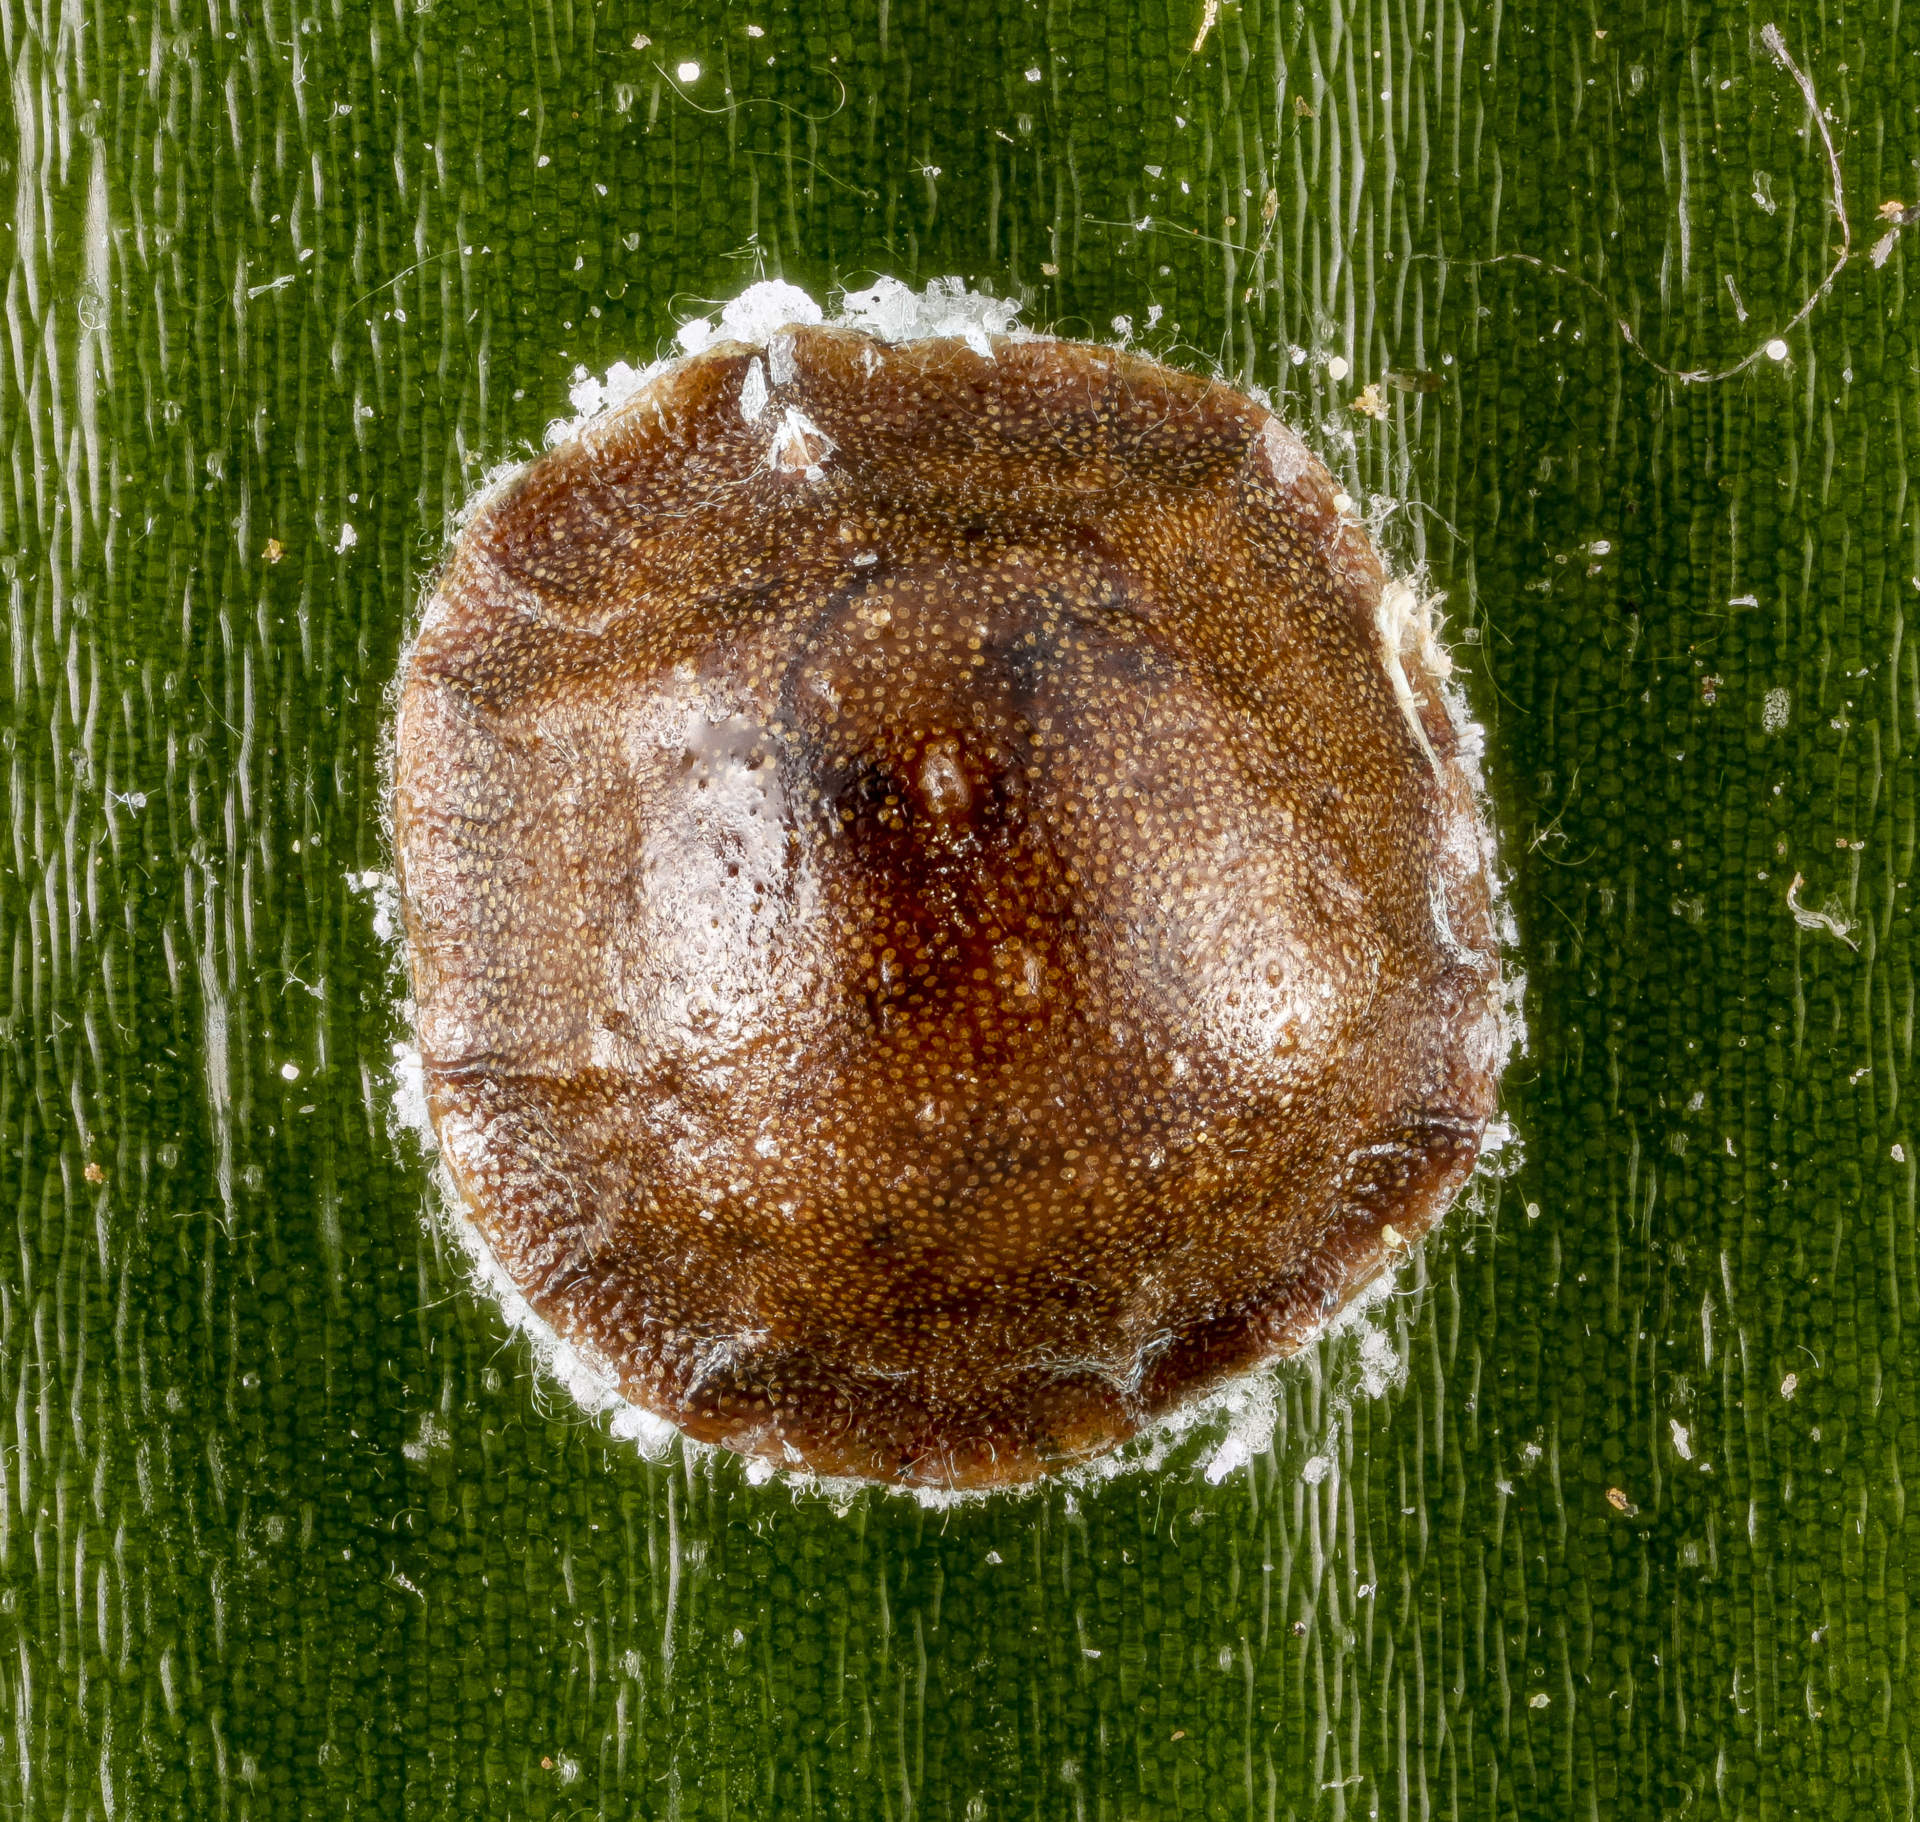 up close image of scale insect